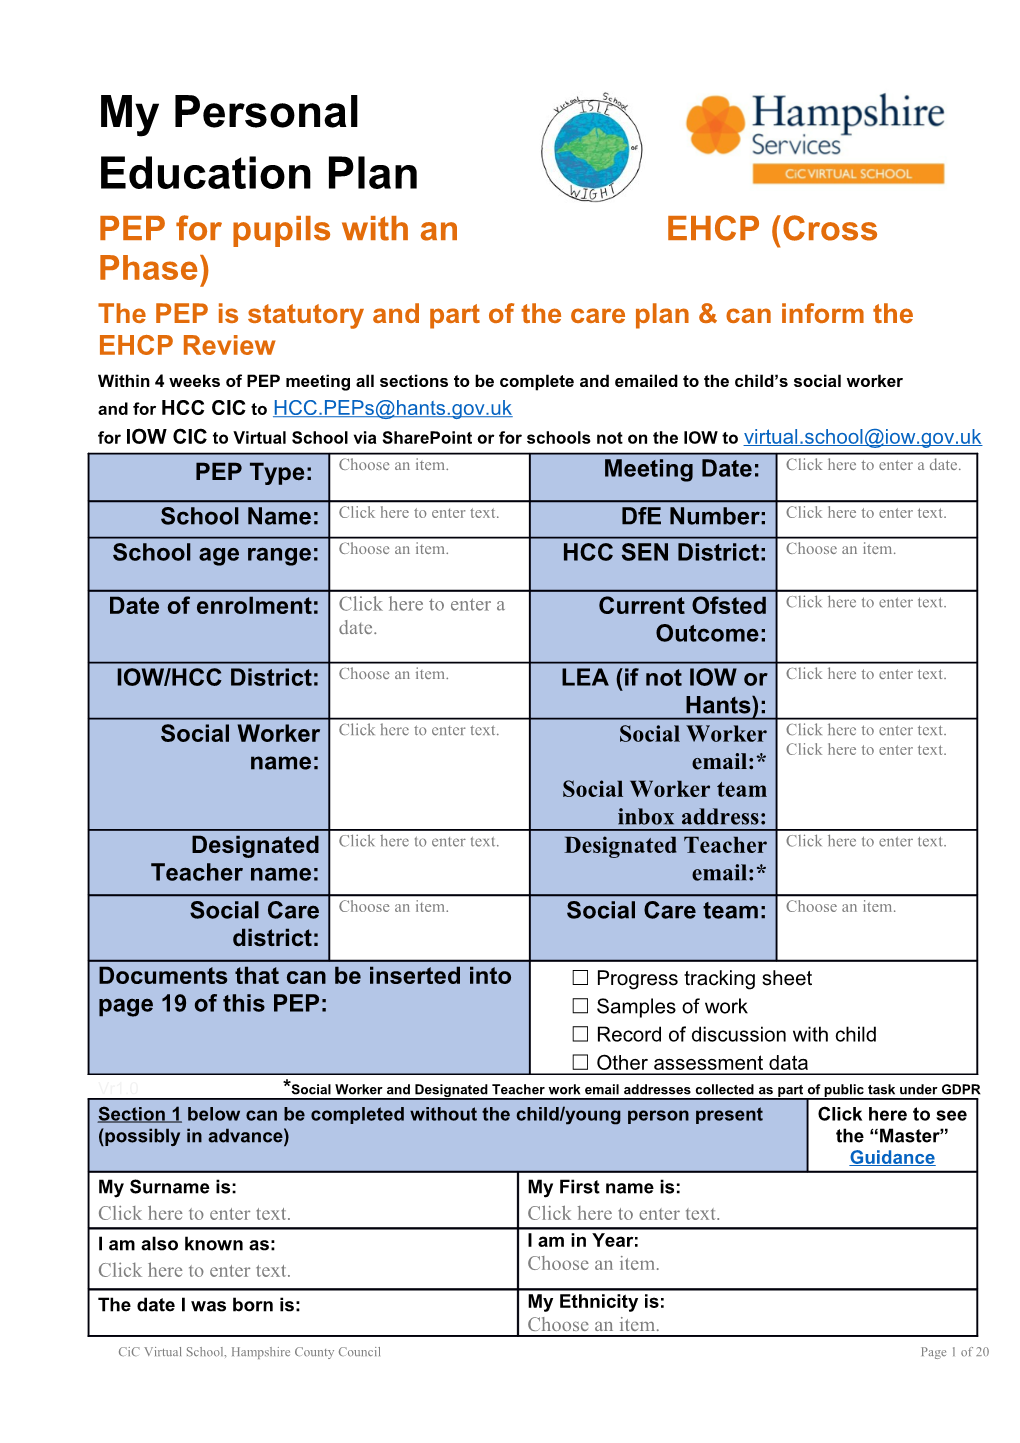 PEP for Pupils with an EHCP (Cross Phase)